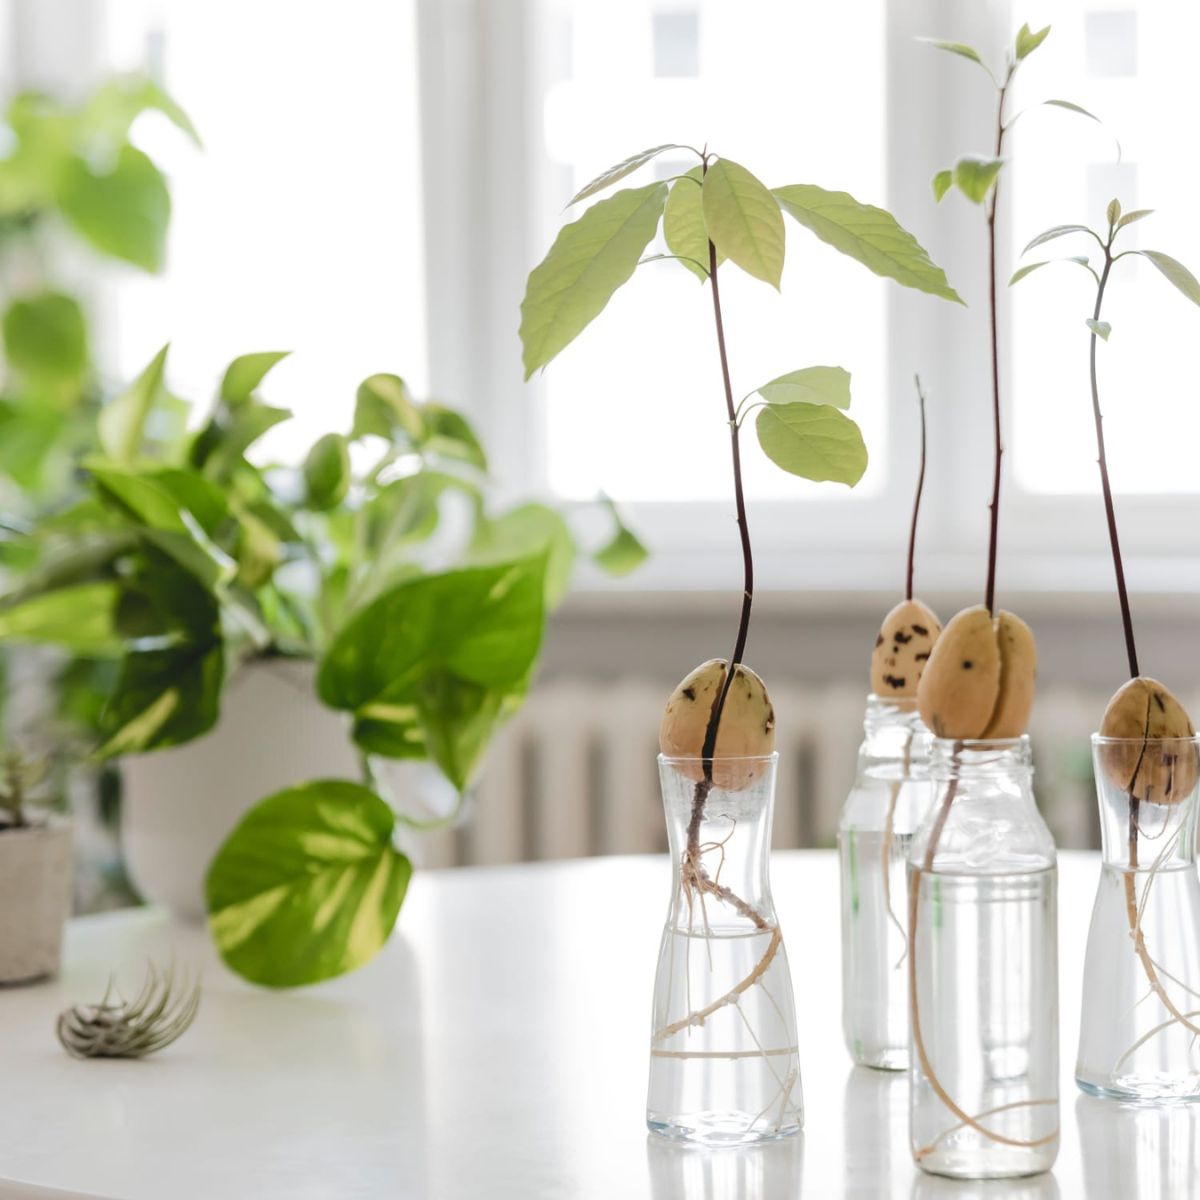 The best tips to growing an avocado plant indoors on Thursd